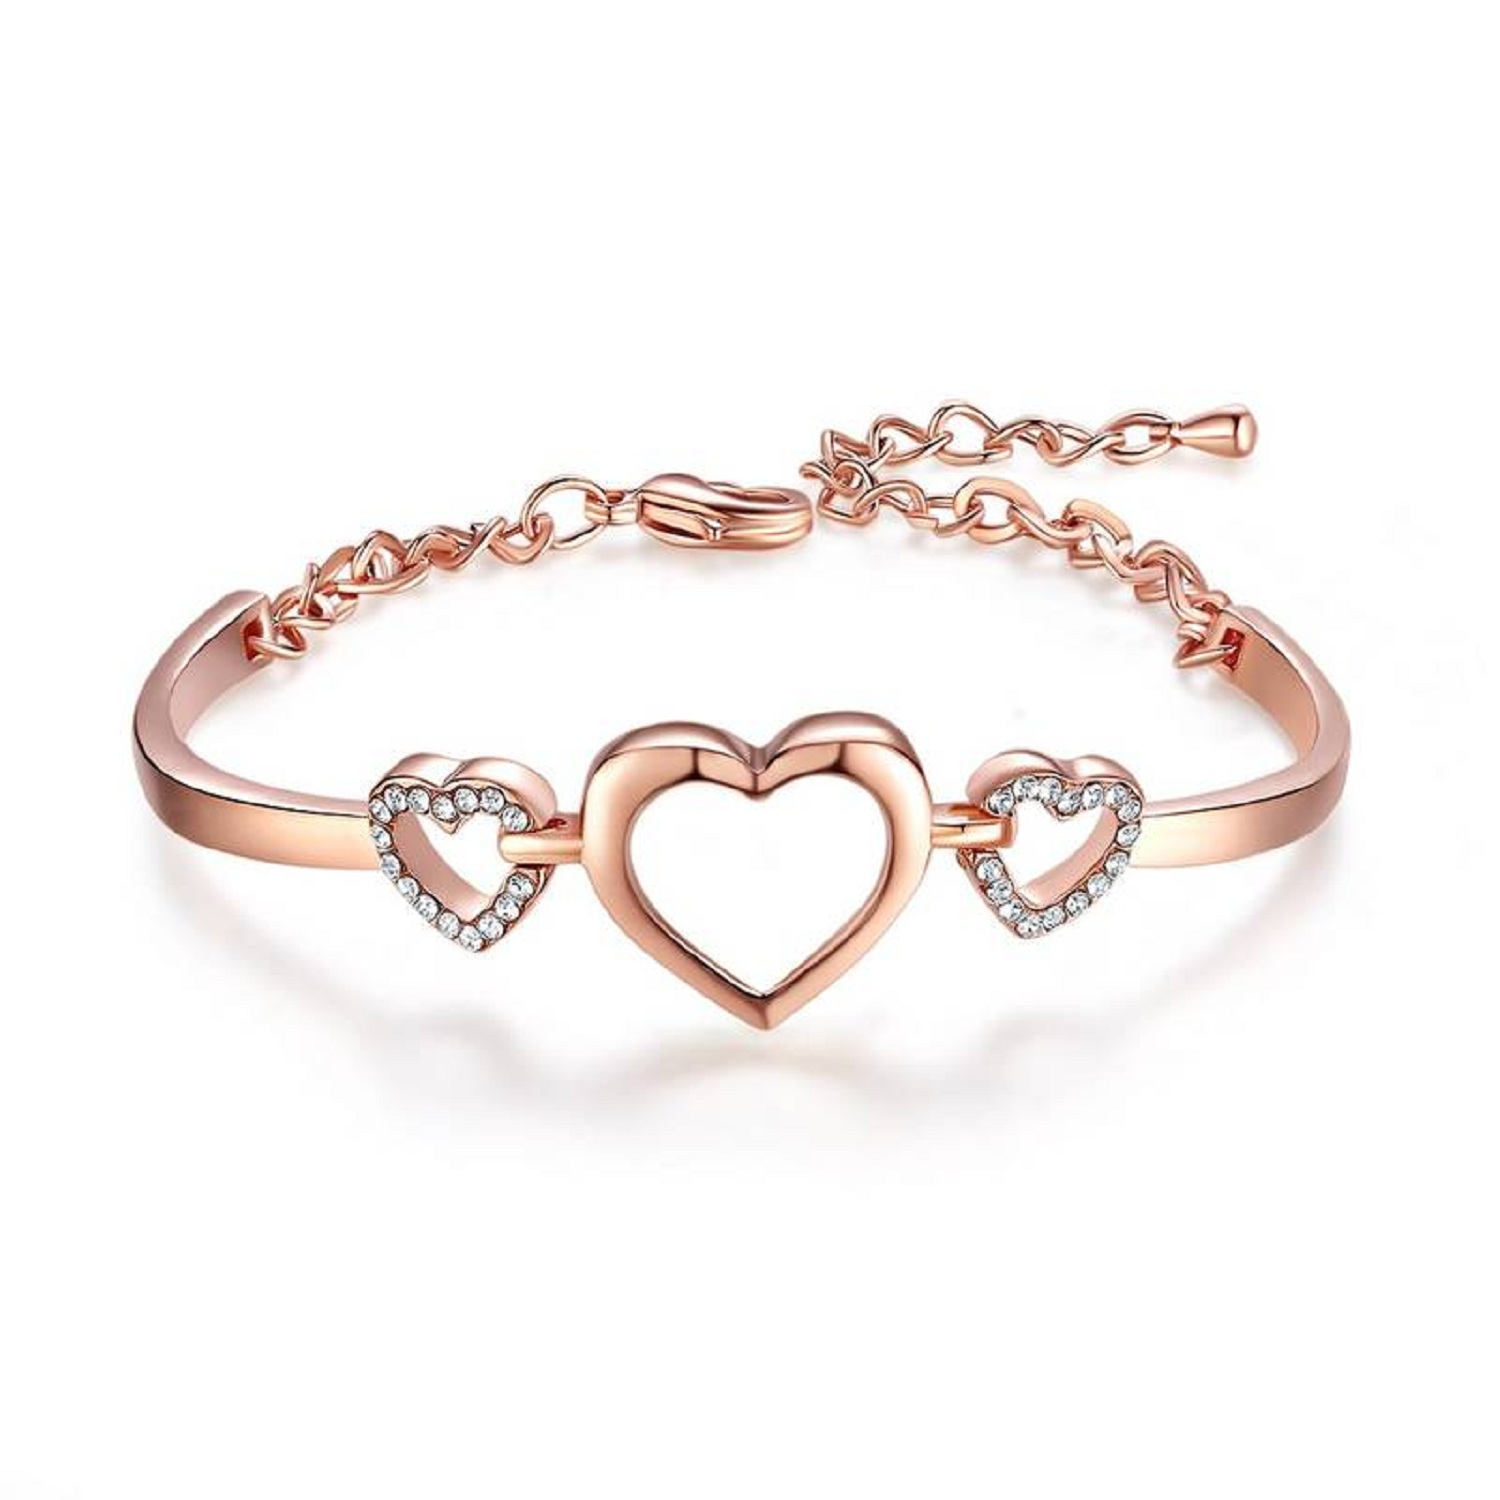 Beautiful Brass Copper Plated HeartShaped Bracelet for Girls Rose Gold